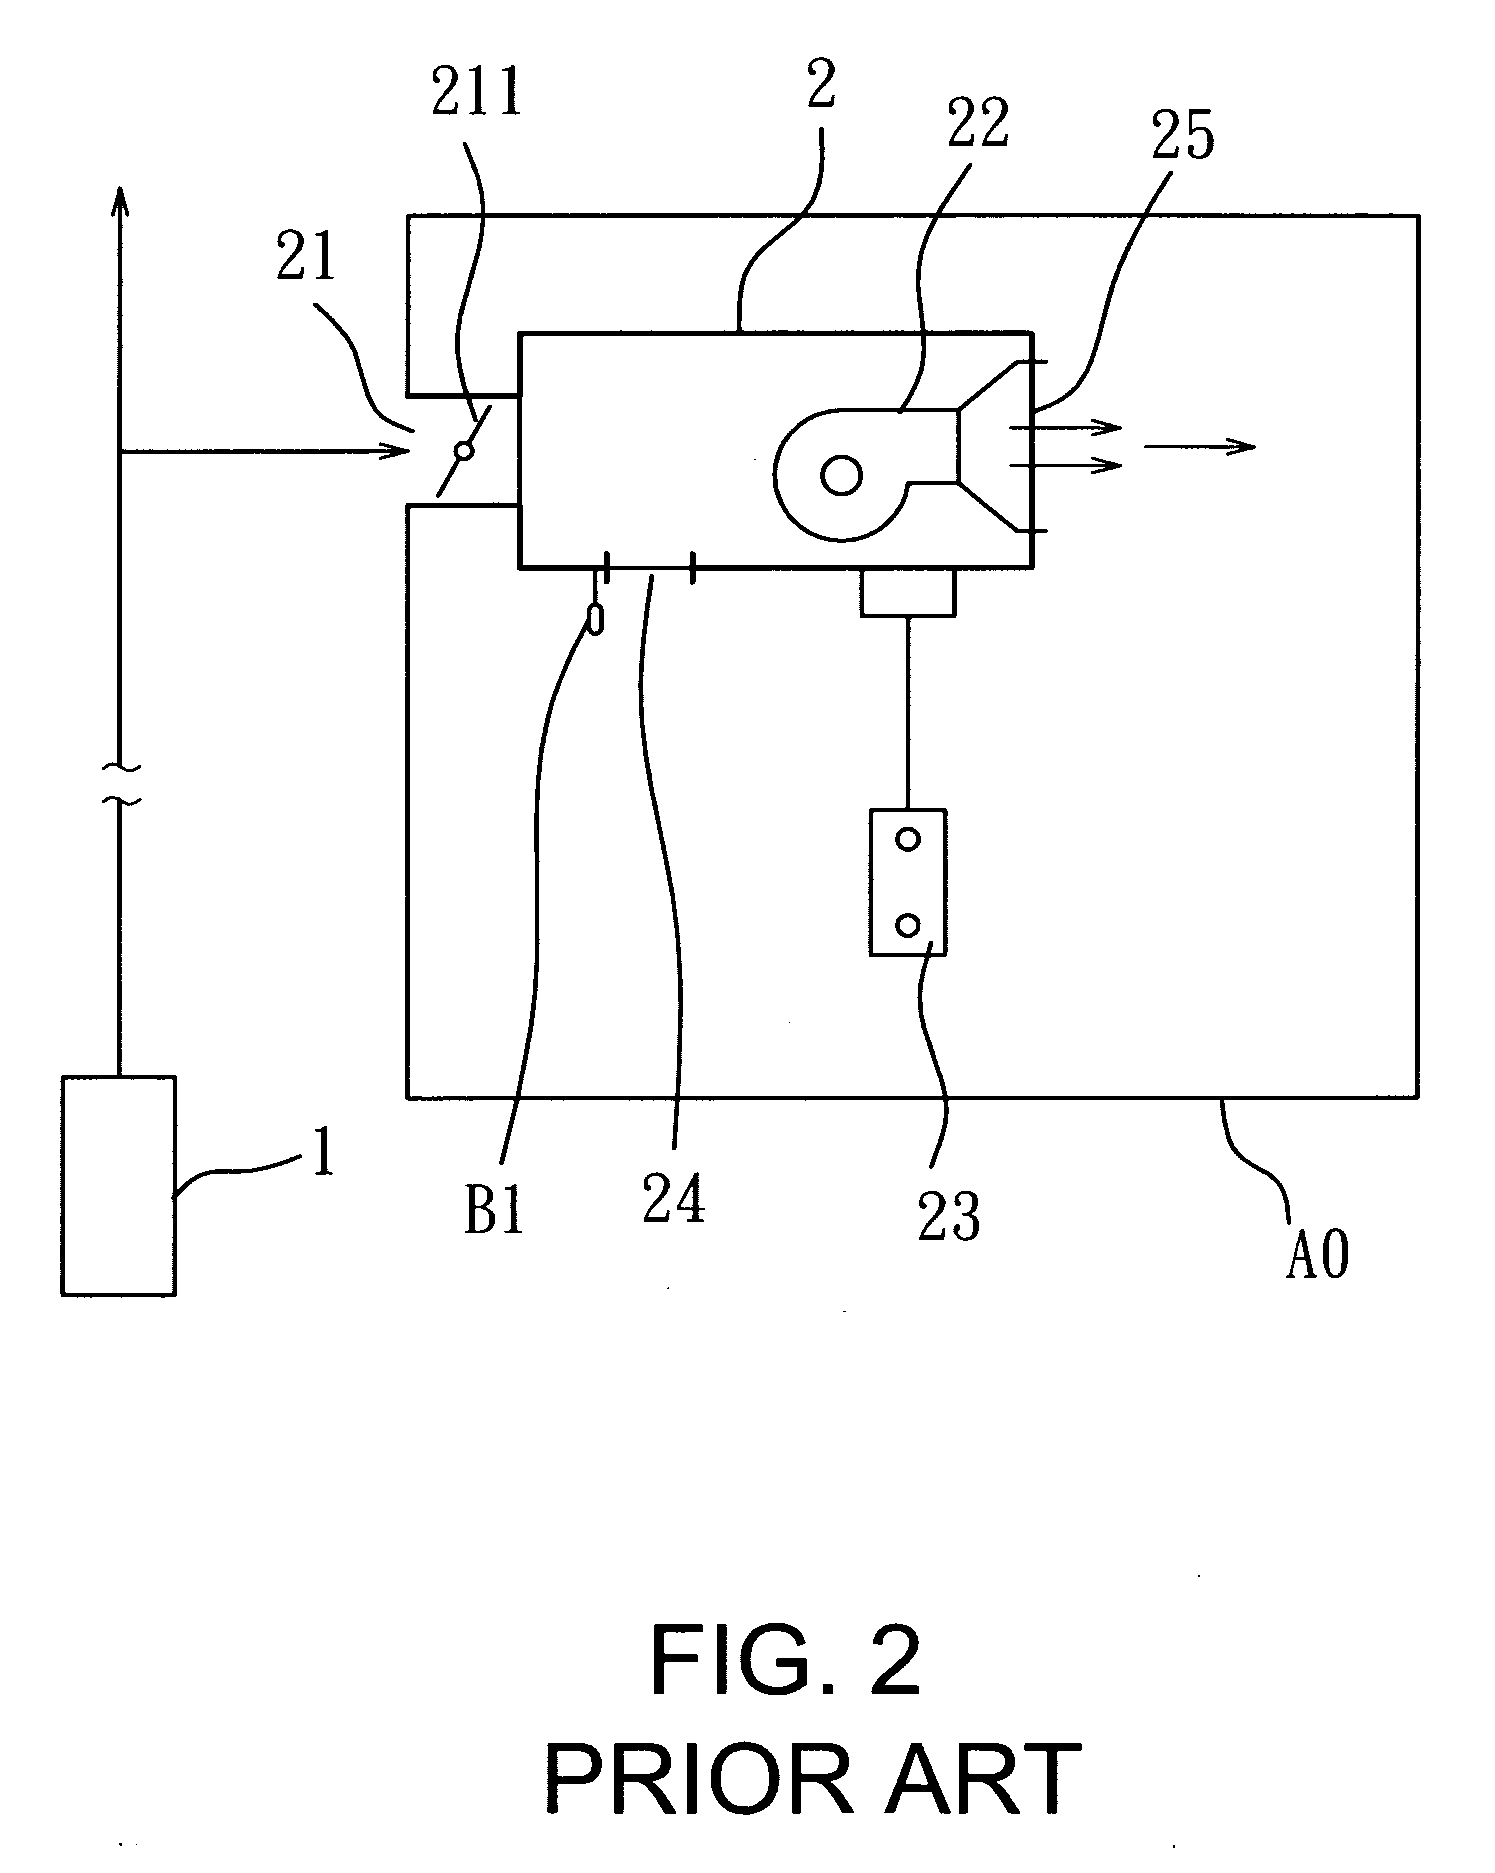 Air conditioning system having a terminal chest to provide optimal airflow